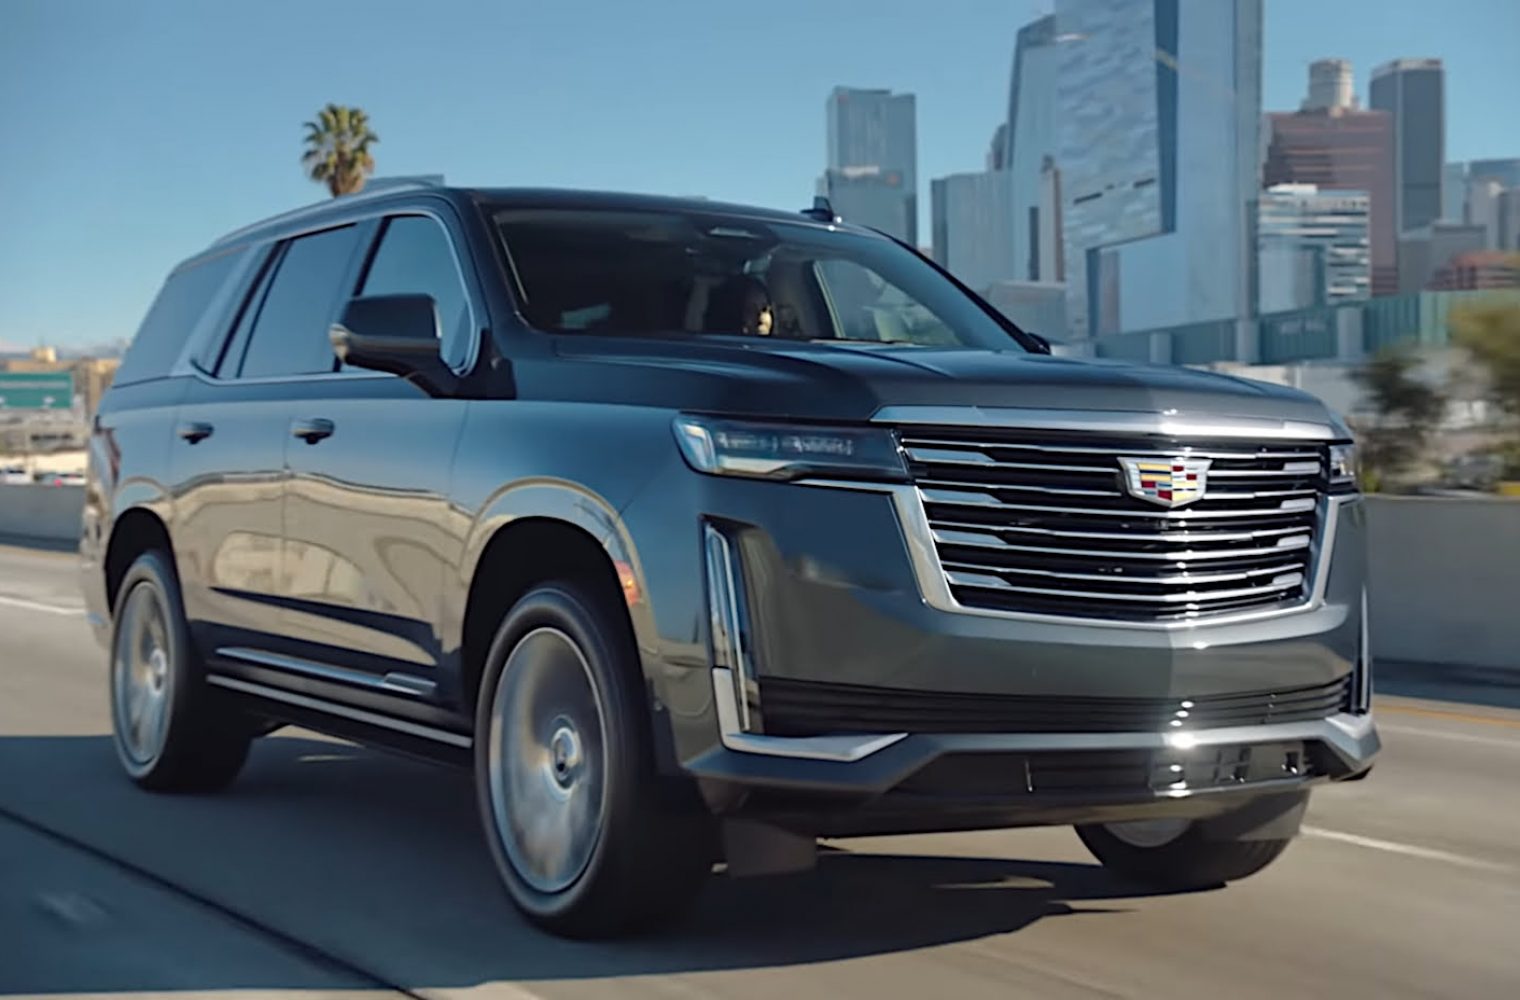 Celebrities Test Drive The Cadillac Escalade With Super Cruise Video